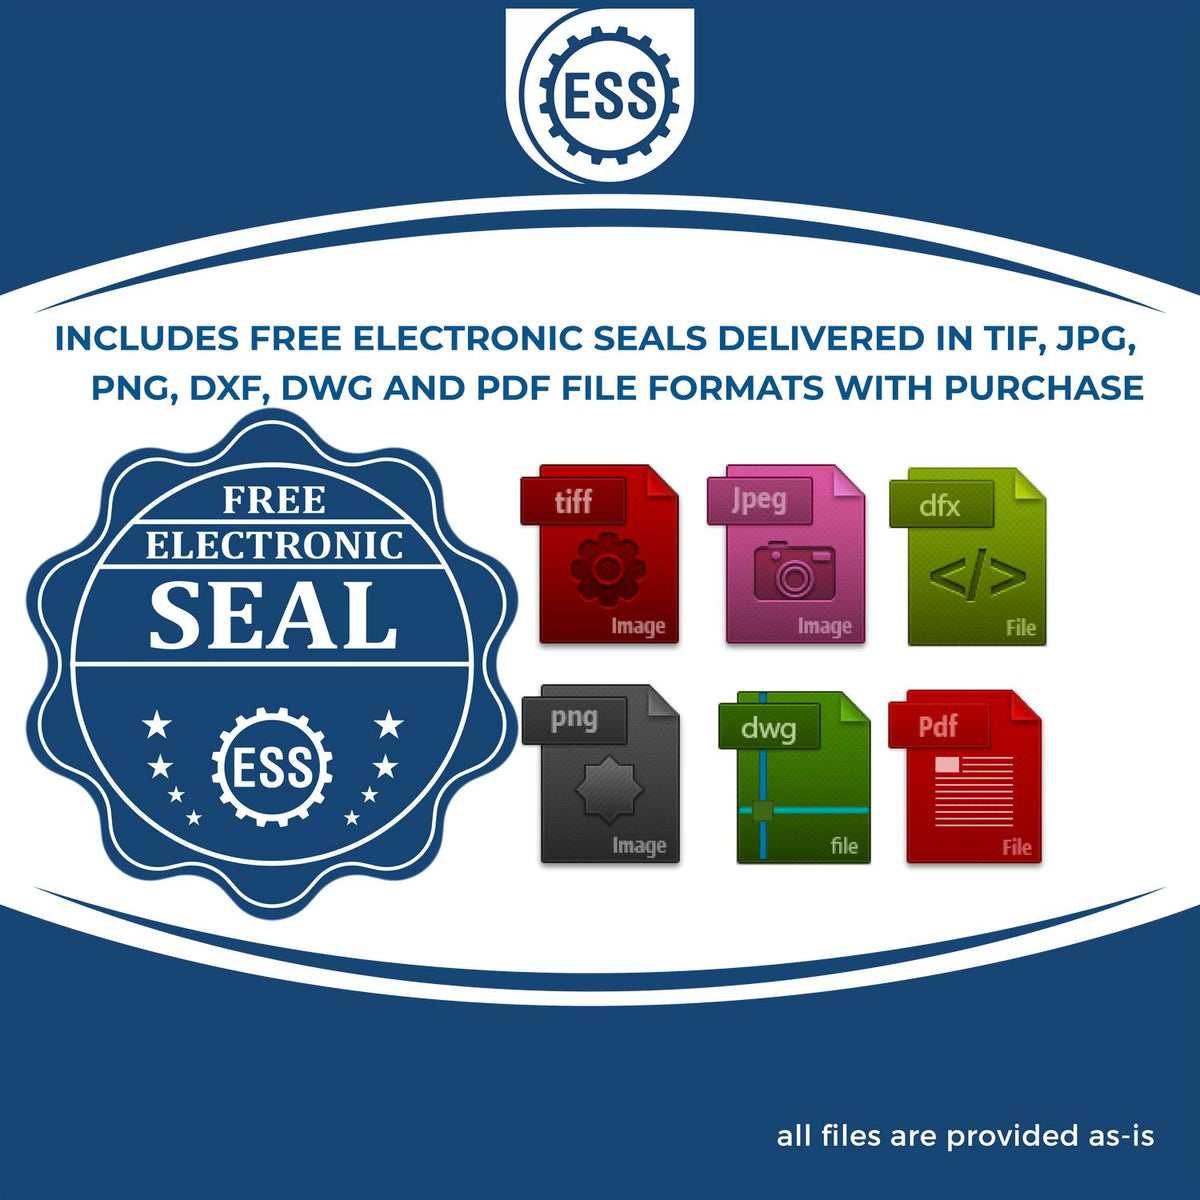 An infographic for the free electronic seal for the Slim Pre-Inked New York Land Surveyor Seal Stamp illustrating the different file type icons such as DXF, DWG, TIF, JPG and PNG.